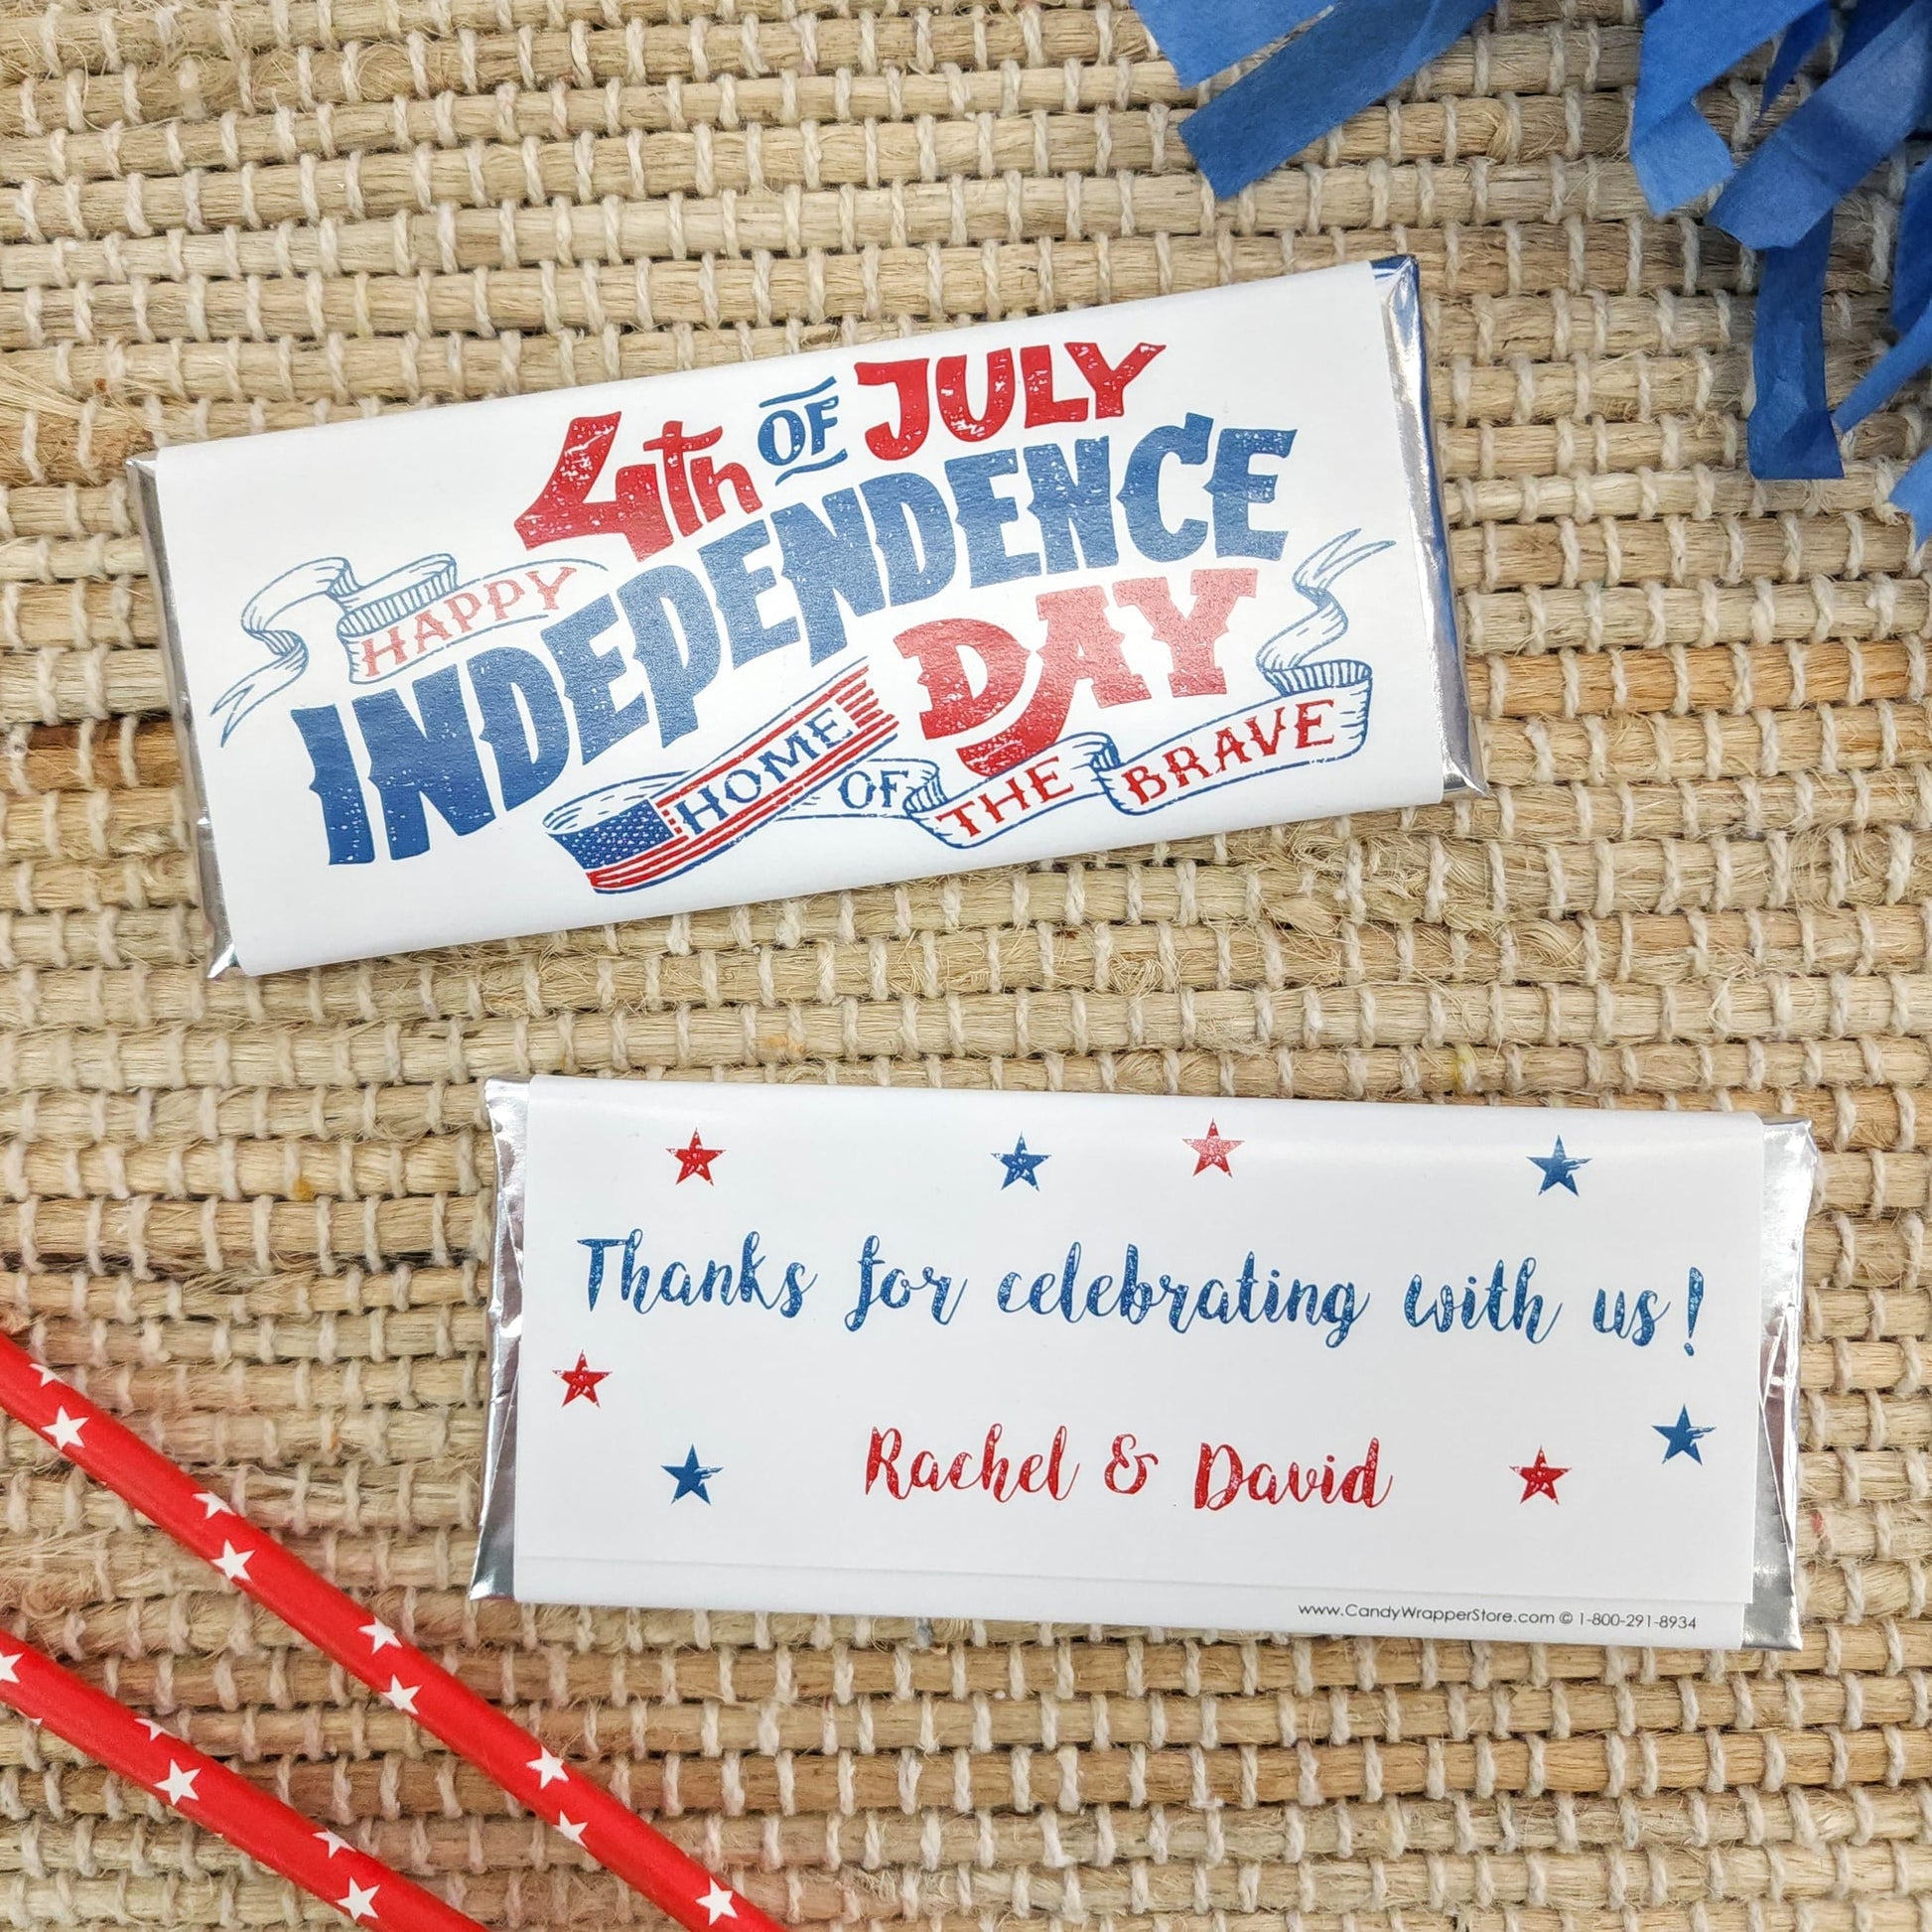 IND211 - Hand Lettered Vintage 4th of July Candy Bar Wrapper Hand Lettered Vintage 4th of July Candy Bar Wrapper Candy Wrapper Store